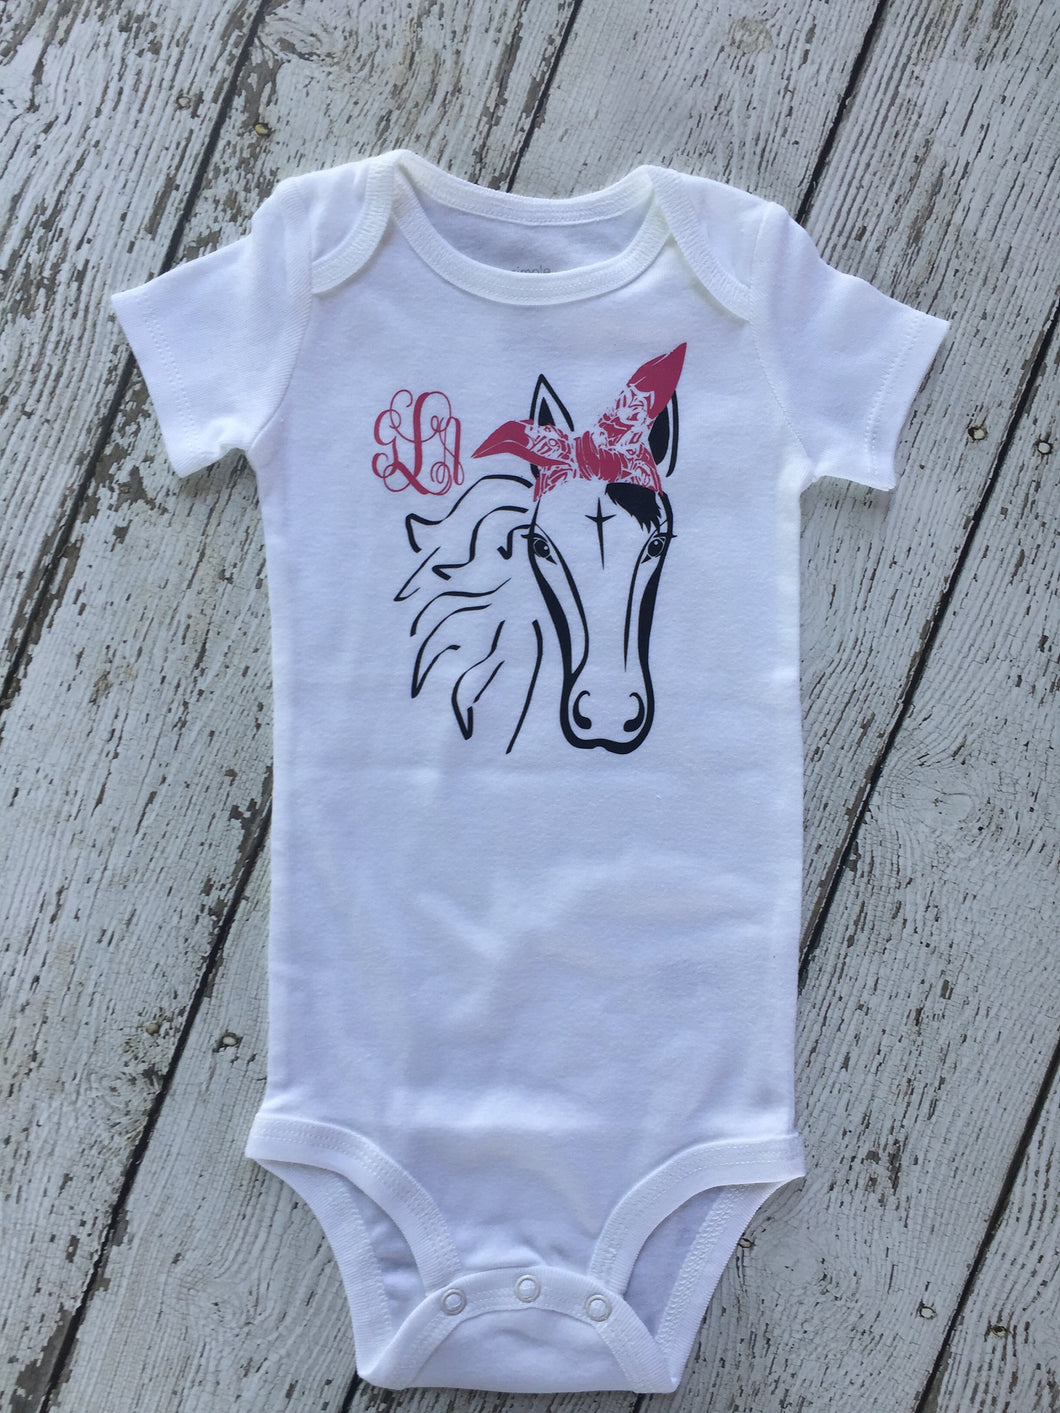 Horse Personalized Baby Outfit, Personalized Horse Baby Outfit, Horse Baby Outfit Personalized, Horse Lover Outfit For Baby Shower Gift